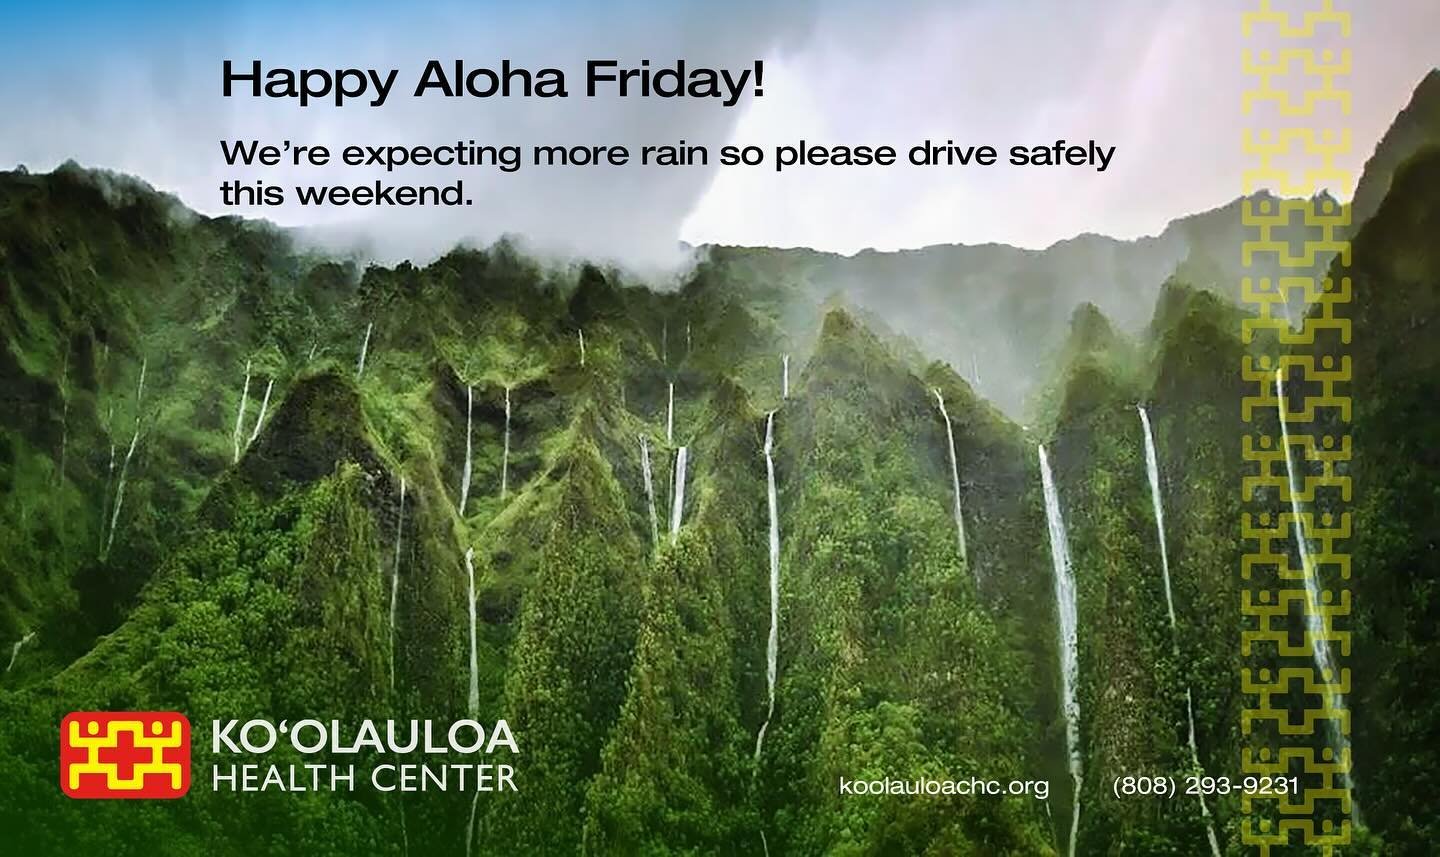 Aloha &lsquo;Ohana!

We&rsquo;re expecting more rain on the windward side this weekend so please be mindful and drive safe if you have to go out. Have a happy Aloha Friday in the mean time. Mahalo!

#bewell #staywell #drivesafe